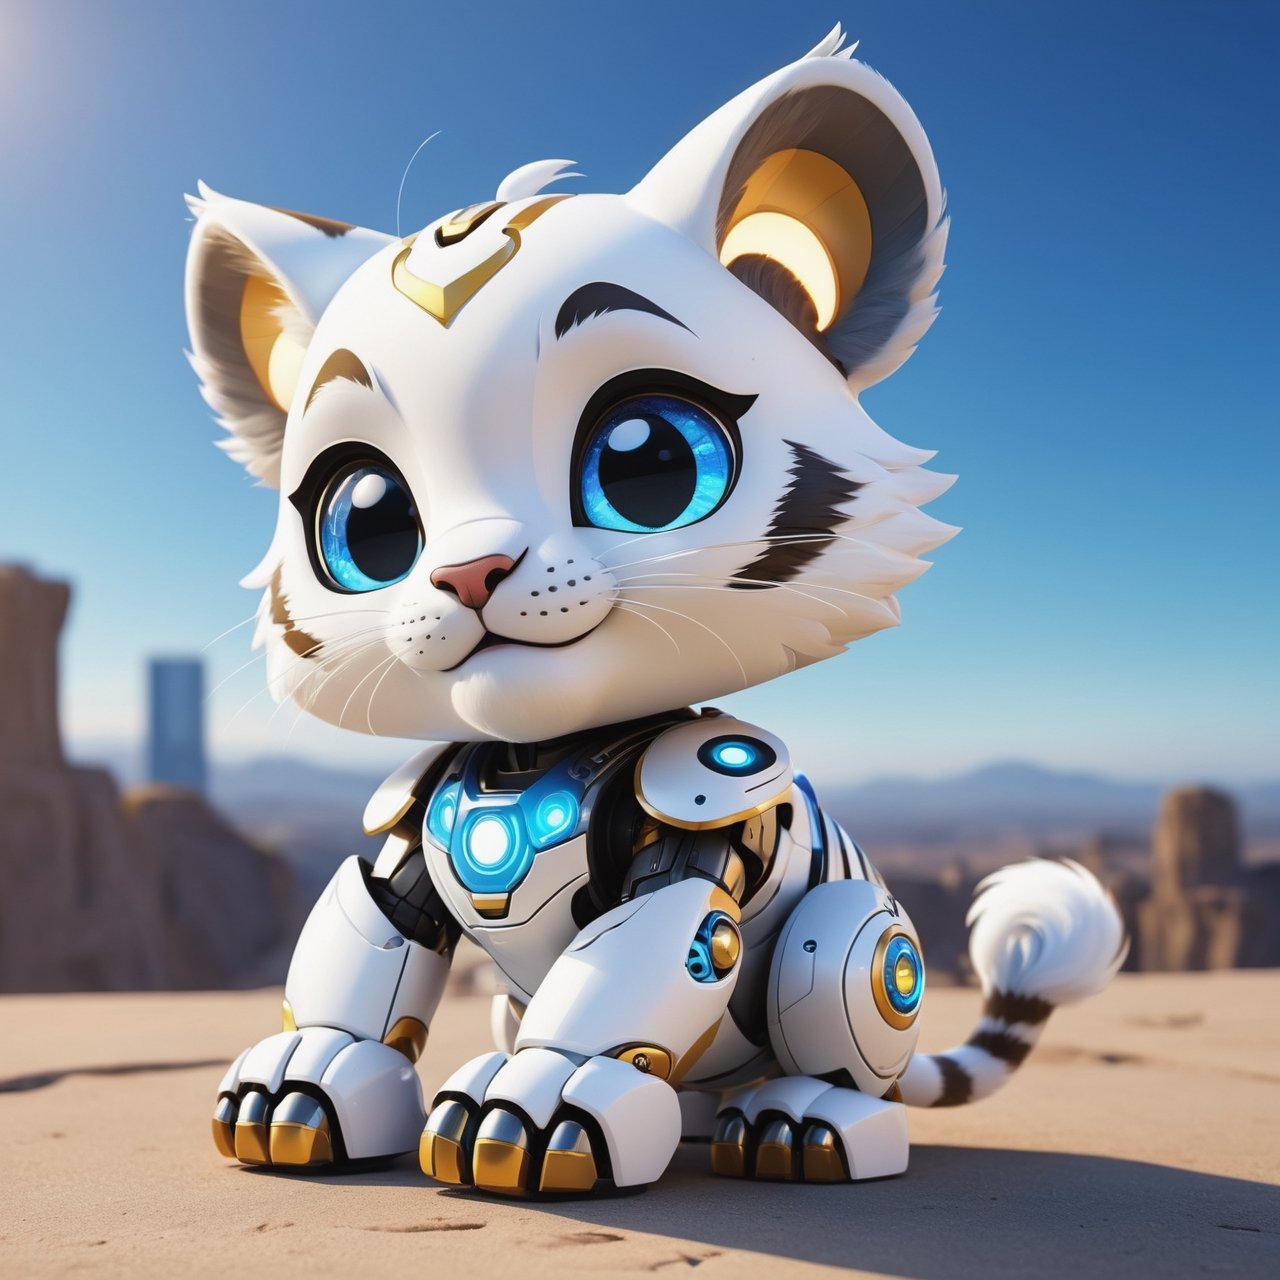 (masterpiece:1.2, highest quality), (realistic, photo_realistic:1.9)
1chibi_robot, Cute chibi white tiger,, happy face,  Chest written: TA, (Designer look holding a paintbrush in one hand), white with blue, (detailed background), (gradients), colorful, detailed landscape, visual key, shiny skin. Modern place, Action camera. Portrait film. Standard lens. Golden hour lighting.
sharp focus, 8k, UHD, high quality, frowning, intricate detailed, highly detailed, hyper-realistic,interior,robot white with blue,chibi emote style,Monster, wall-e